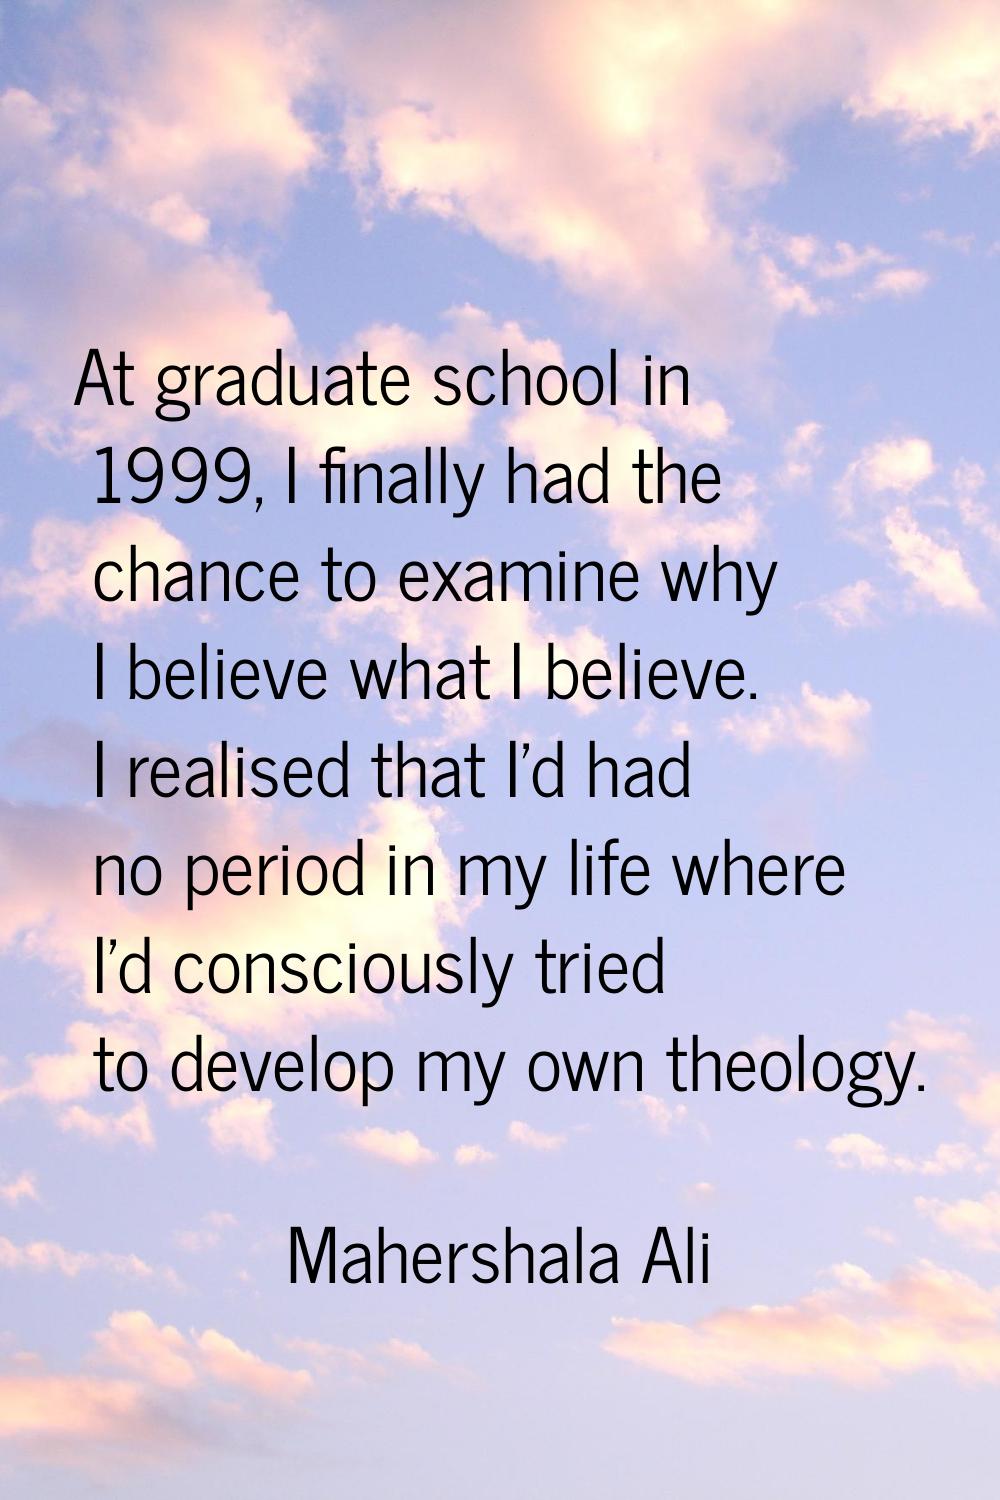 At graduate school in 1999, I finally had the chance to examine why I believe what I believe. I rea